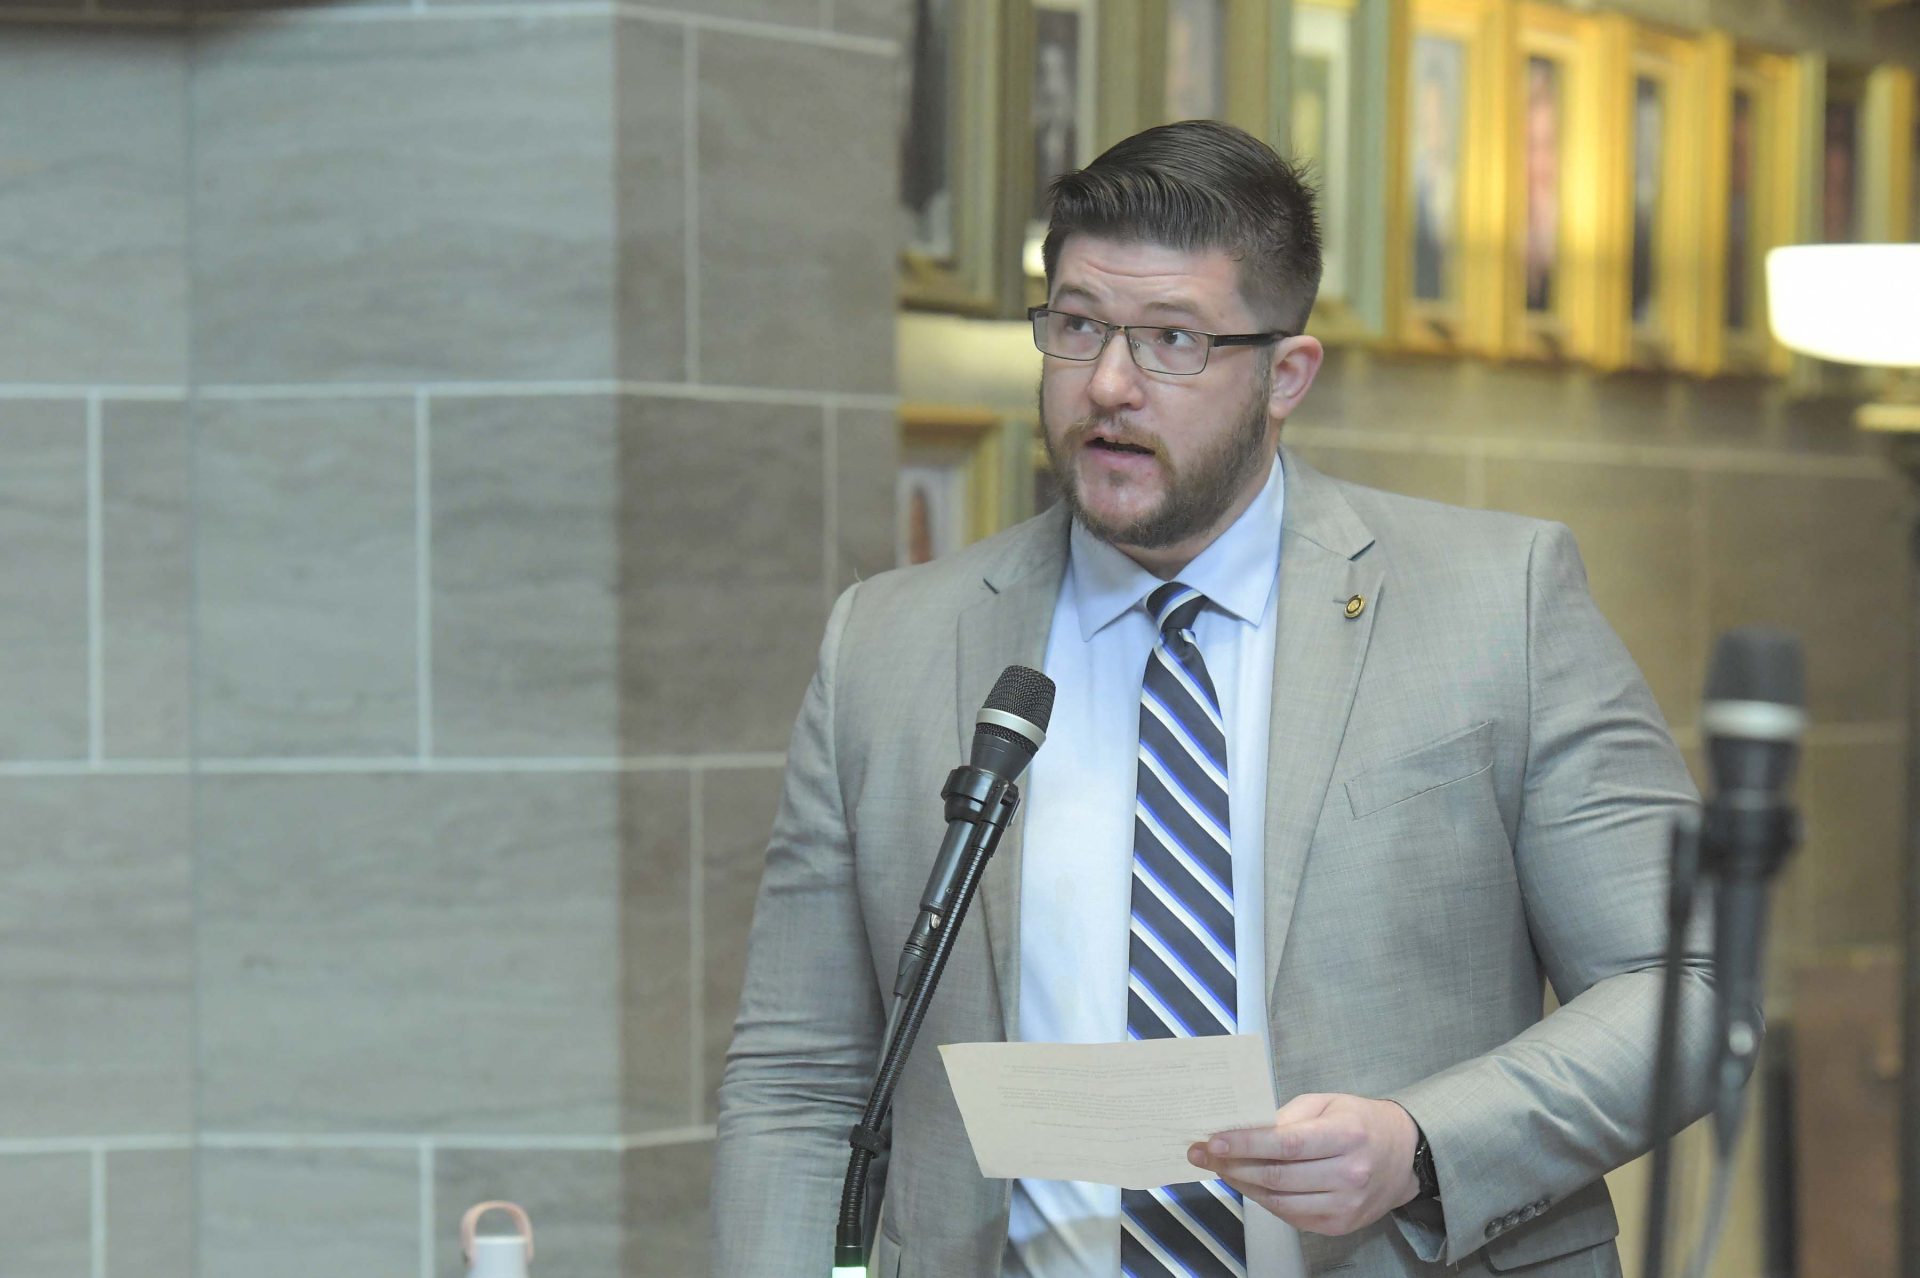 Opioid overdose legislation filed by Columbia state lawmaker